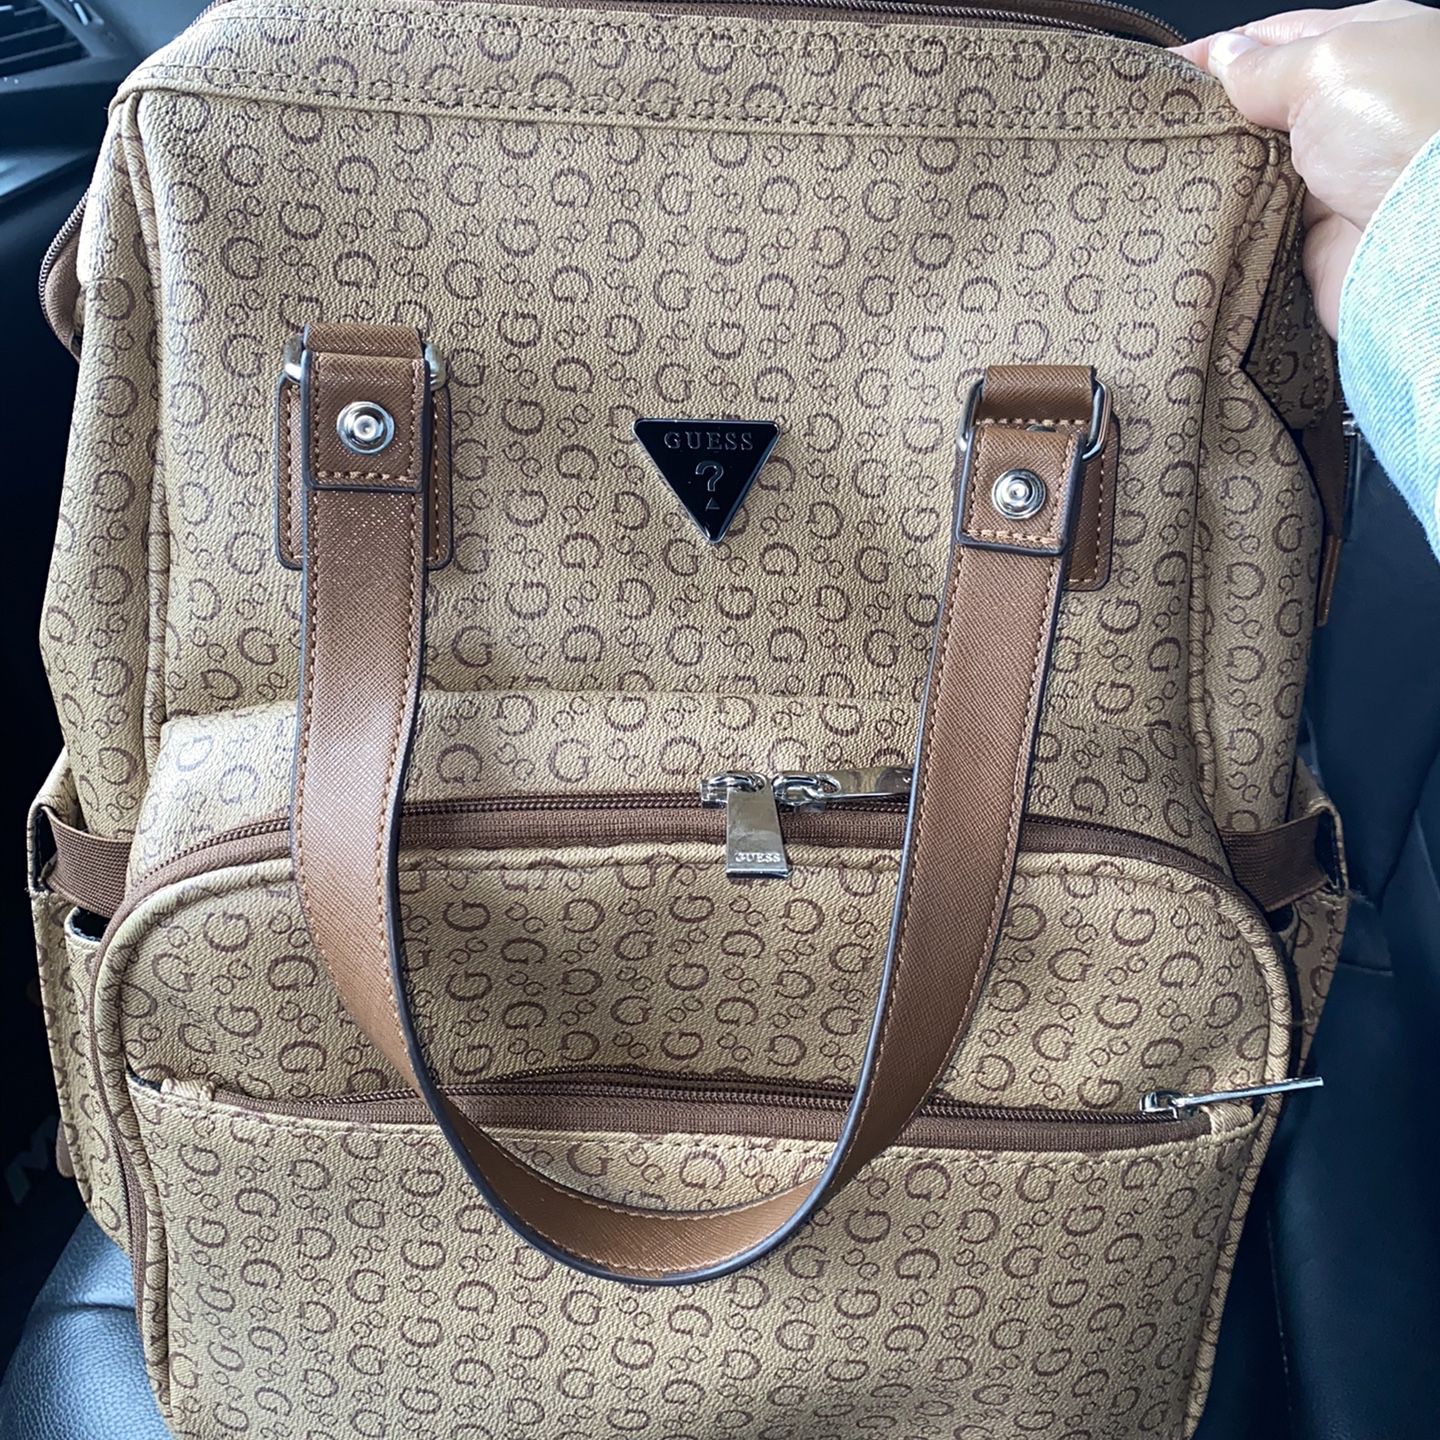 Guess Backpack for Sale in Everett, WA - OfferUp